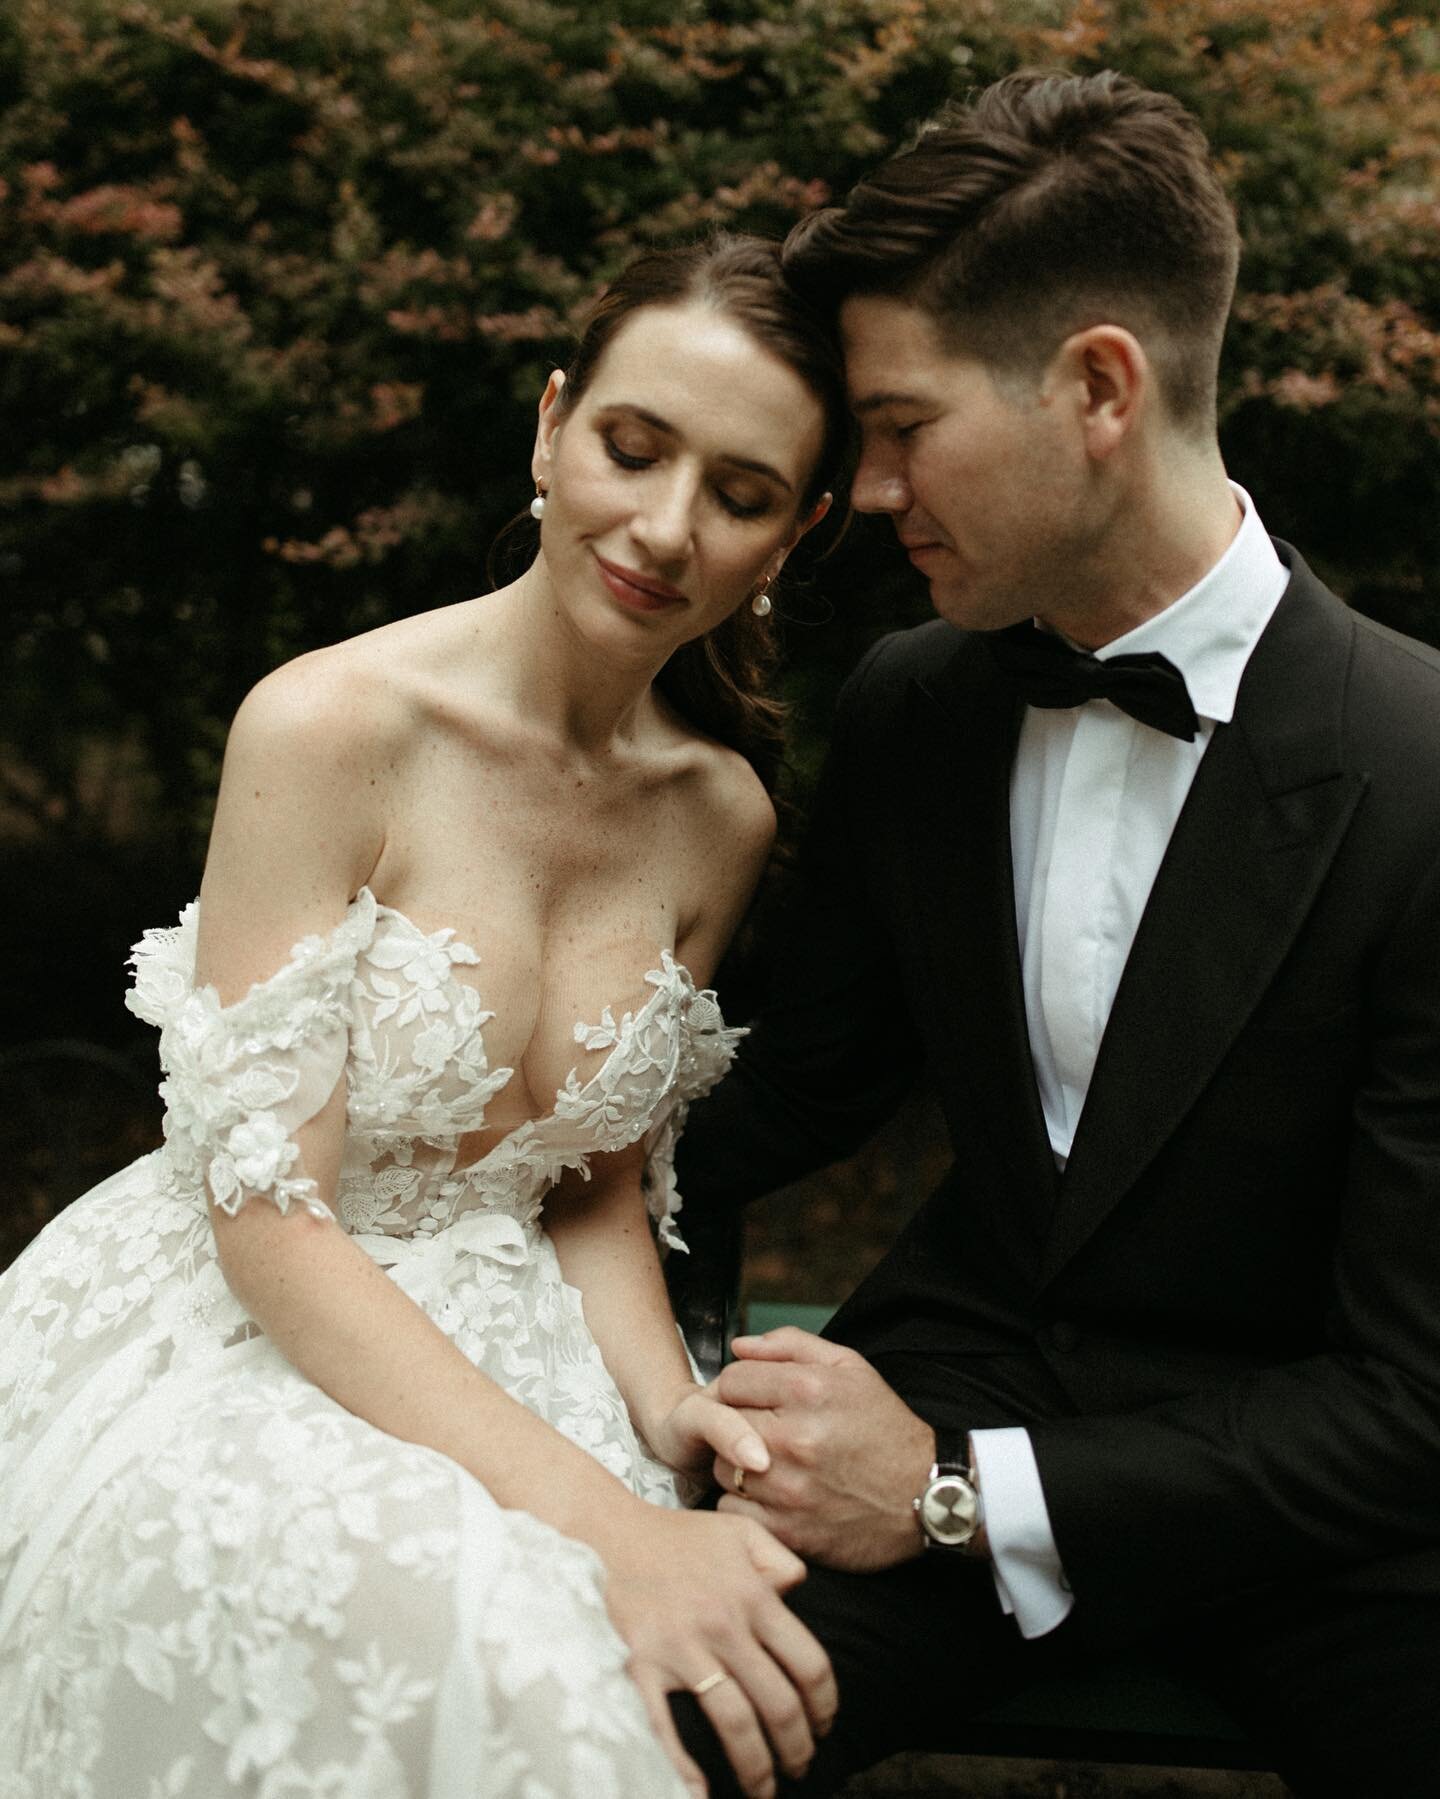 Still not over this incredibly romantic intimate wedding at Van Vorst Park 😭 @jennnnnnnnnnnnnnnnnnnnnnnnn wore one of dreamiest gowns we&rsquo;ve ever seen 👰🏼&zwj;♀️ &amp; every ceremony detail was impeccable ✨ The newlyweds did their first dance 